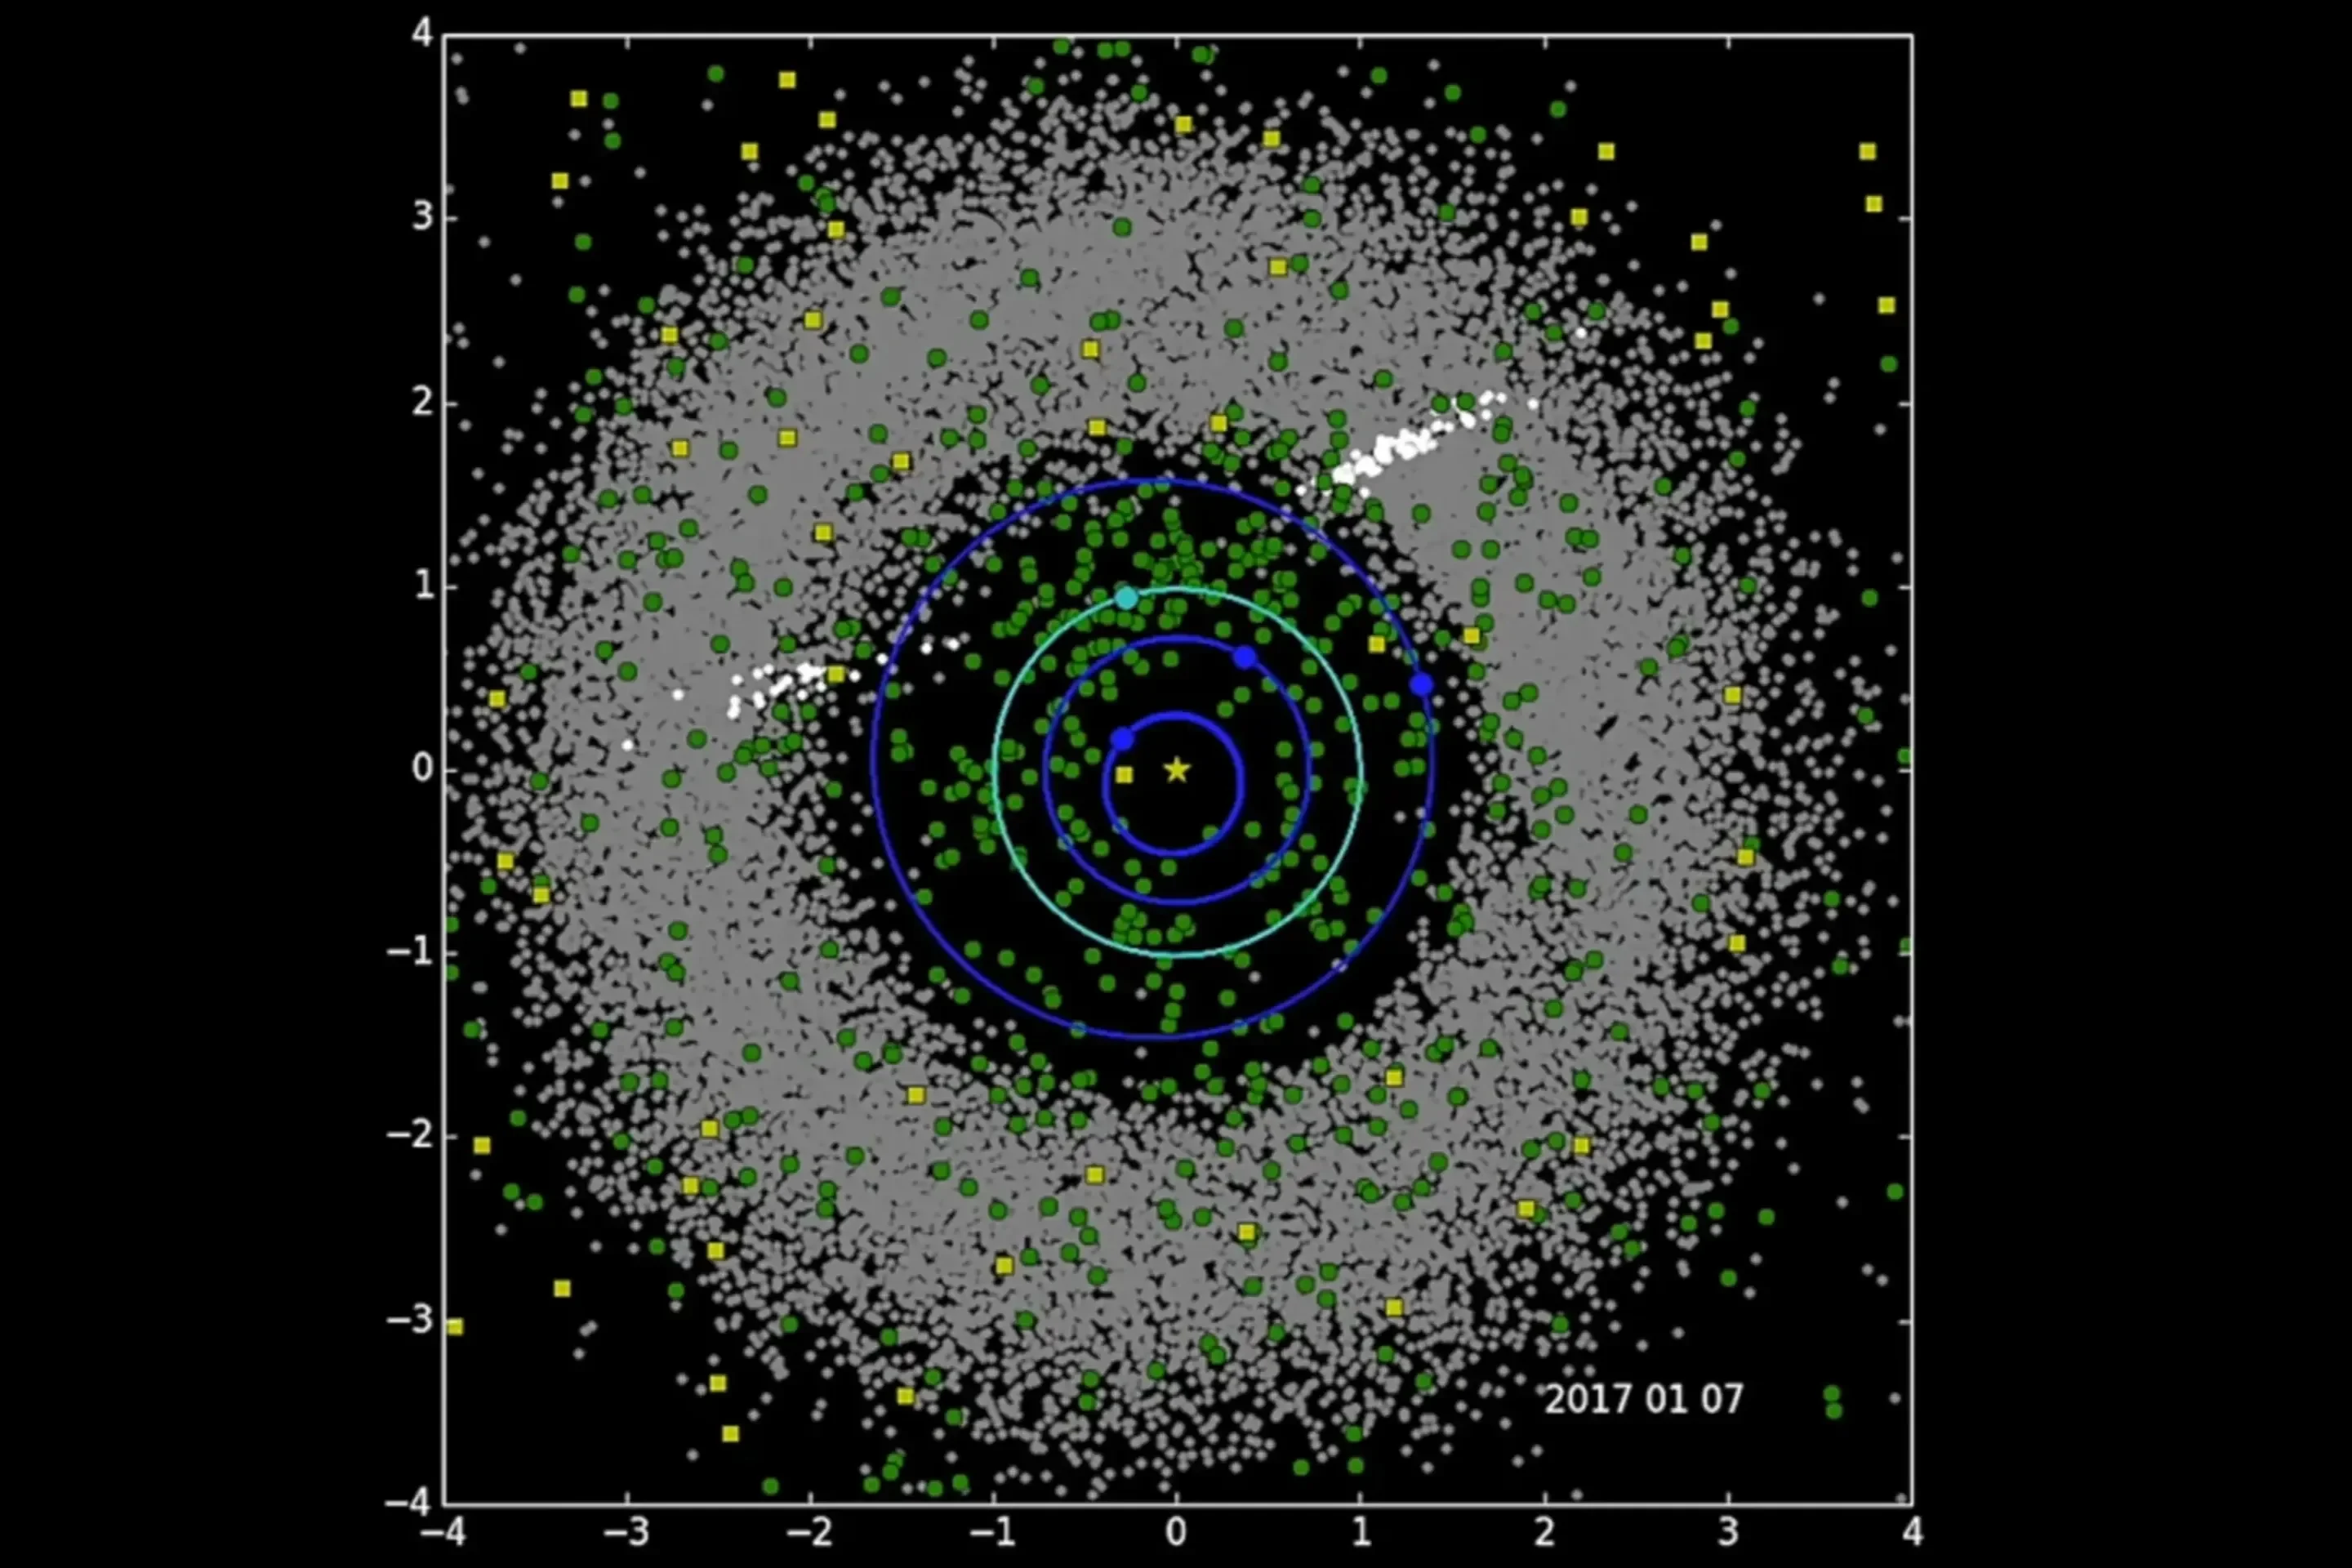 Chronogramme Neowise